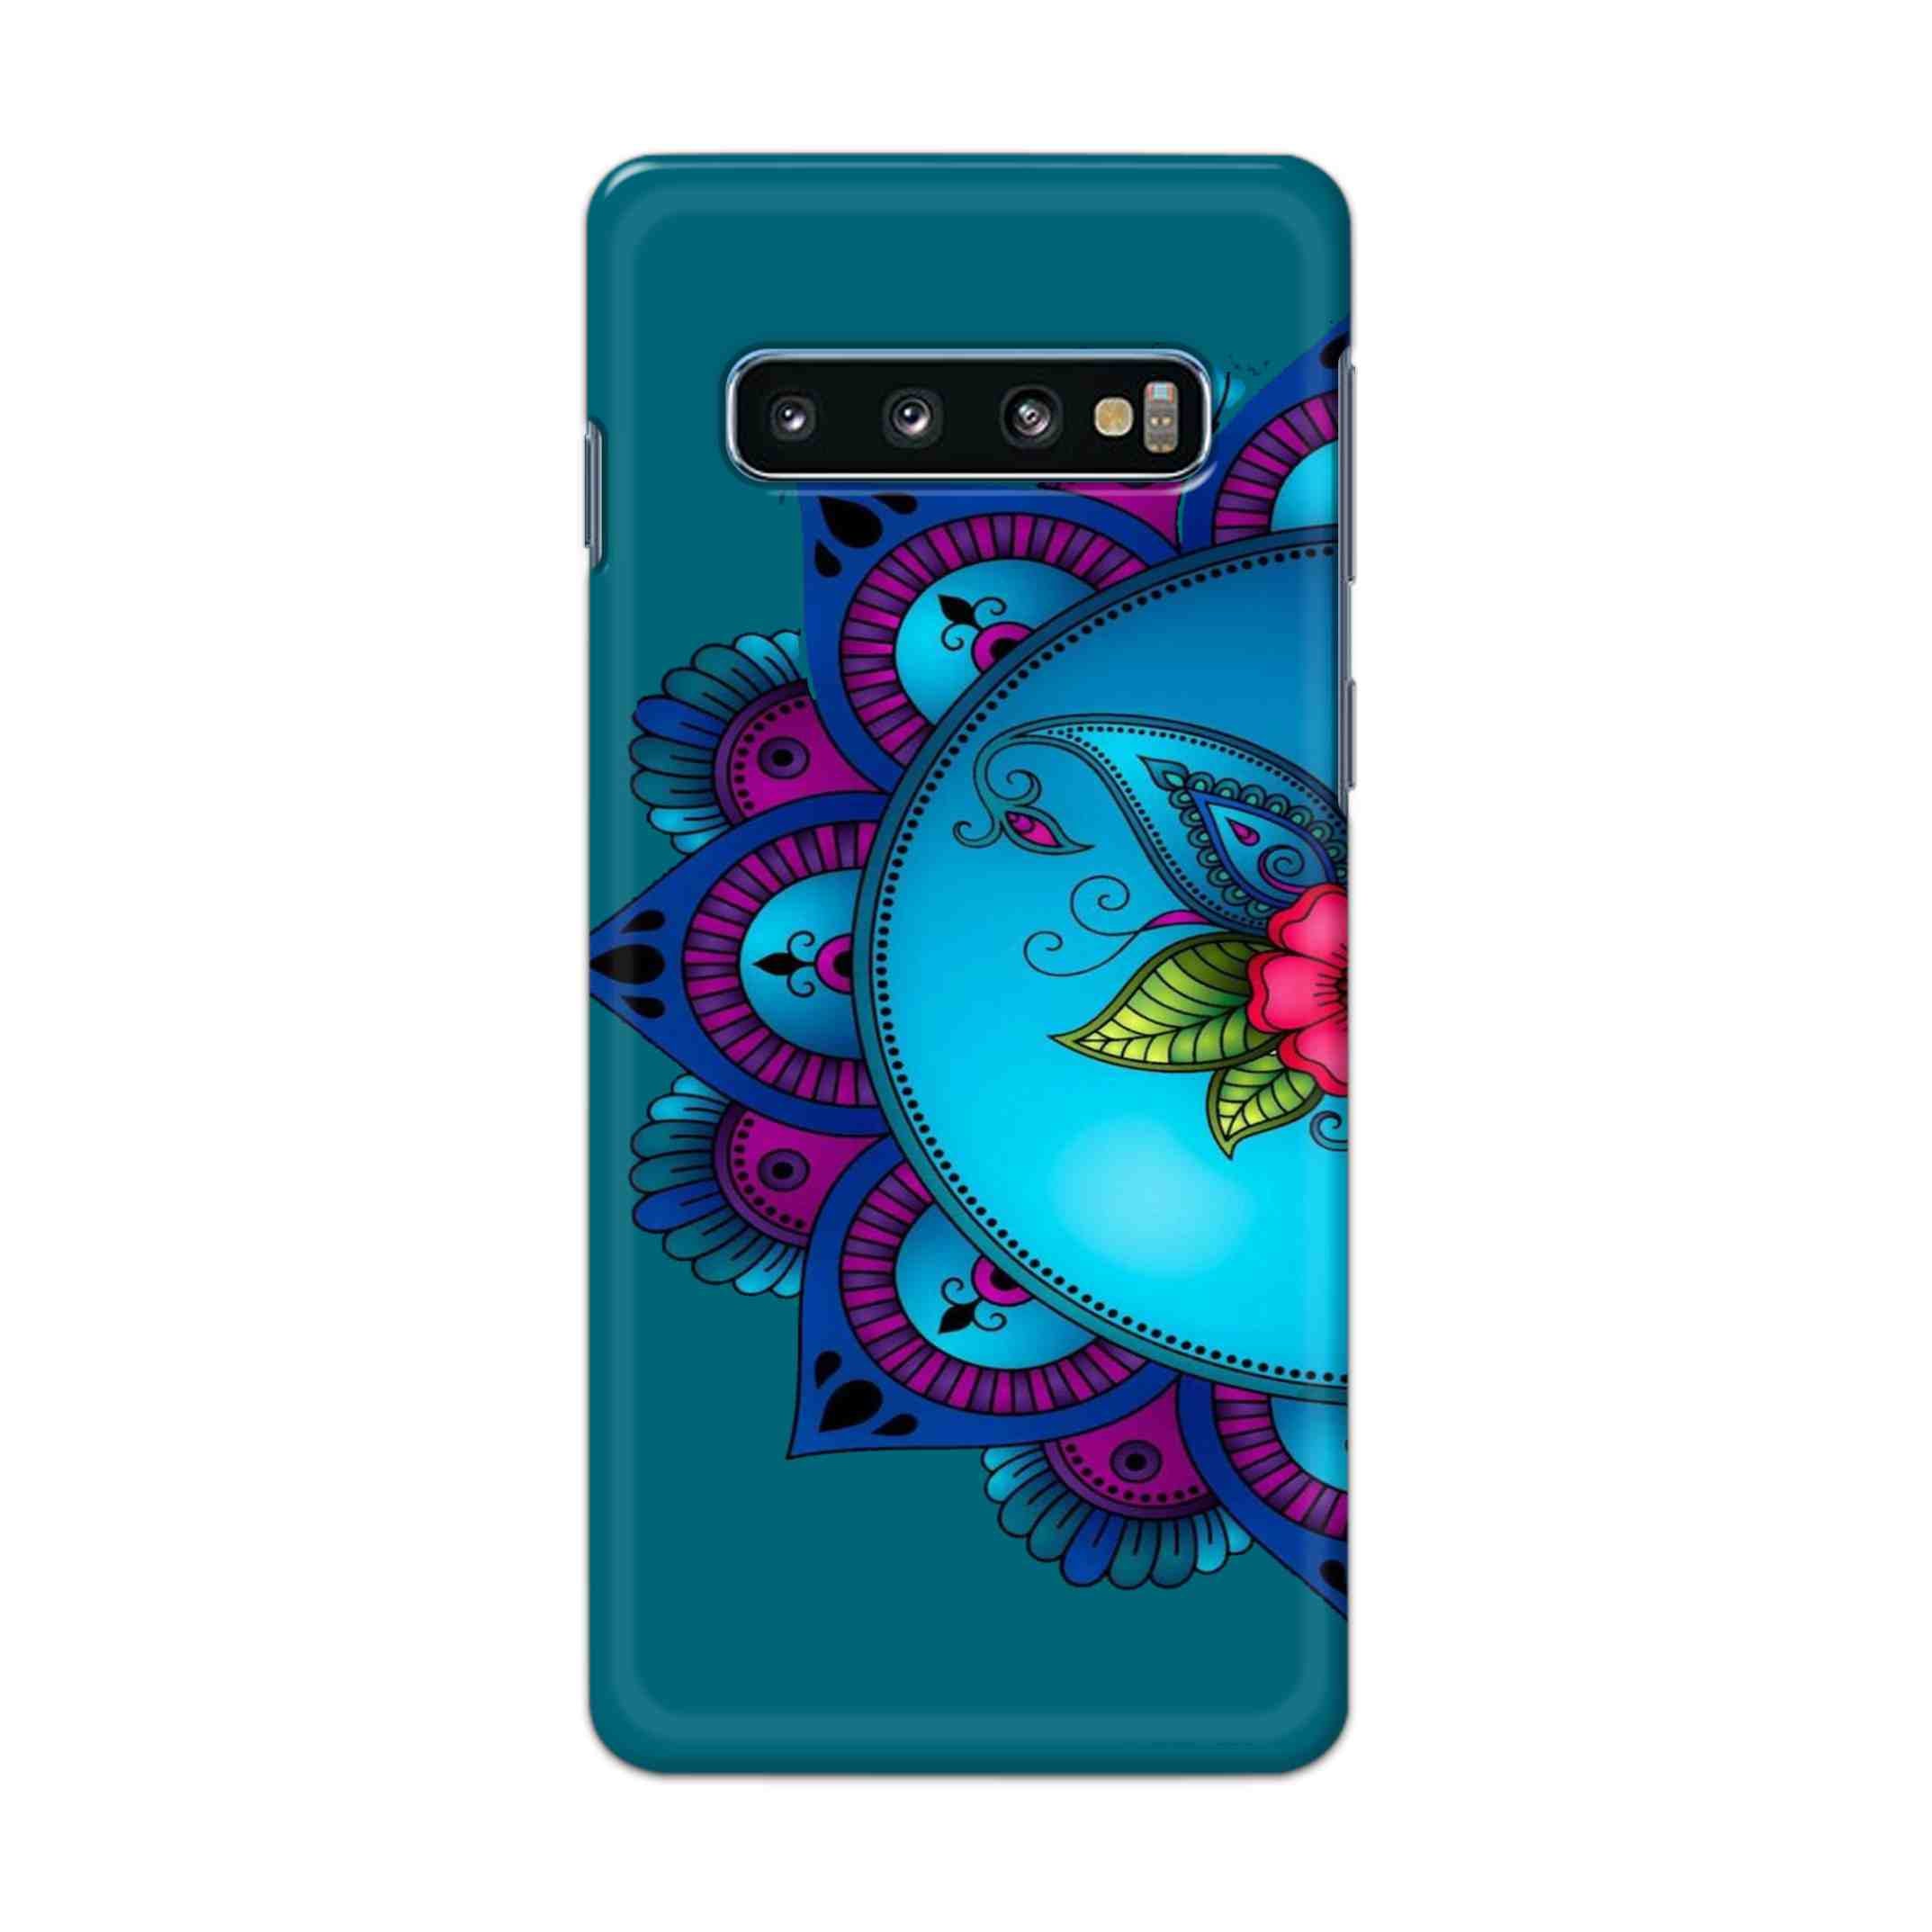 Buy Star Mandala Hard Back Mobile Phone Case Cover For Samsung Galaxy S10 Plus Online